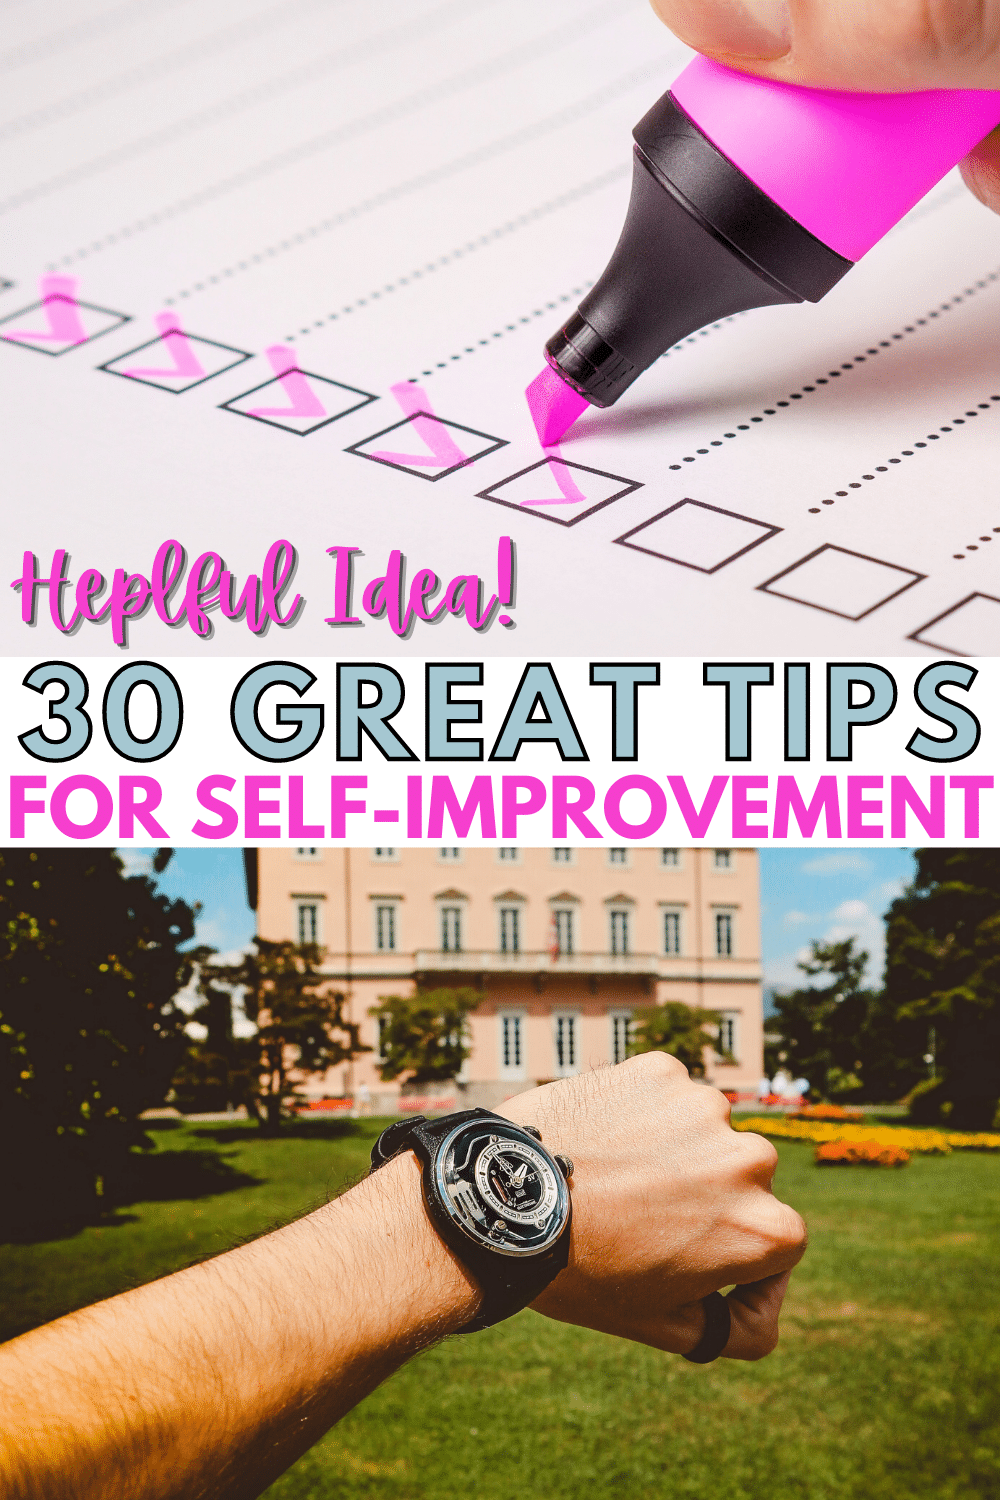 Everyone wants to be the best they can be. By following these 30 self-improvement tips, they will help you be more focused, energetic, and balanced. #selfcare #selfimprovement #metime via @wondermomwannab